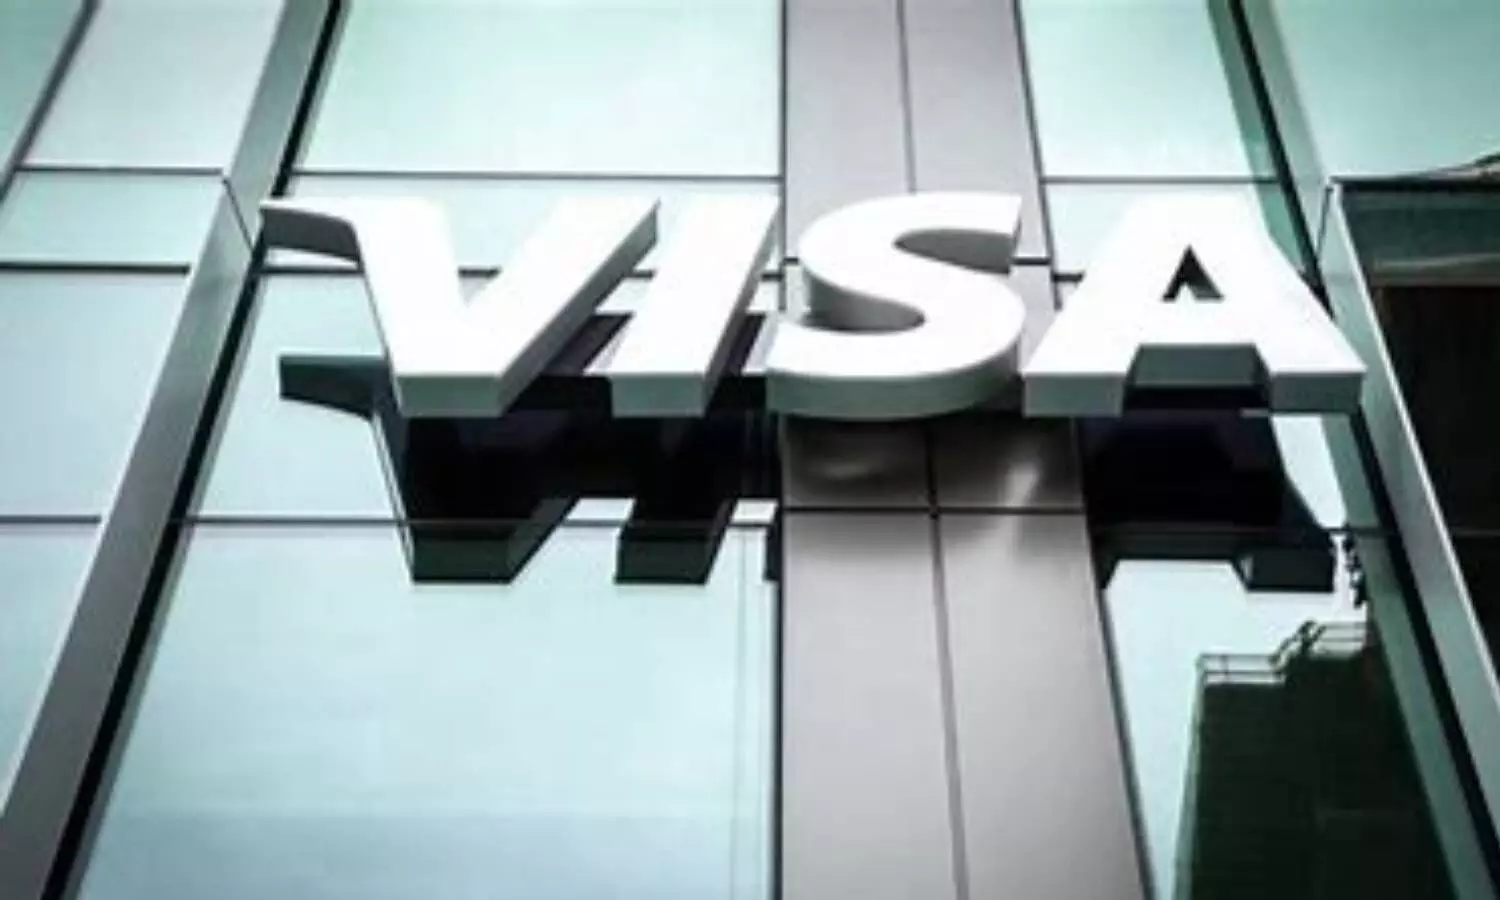 Visa closes $5 million investment as part of Open’s Series C fundraise